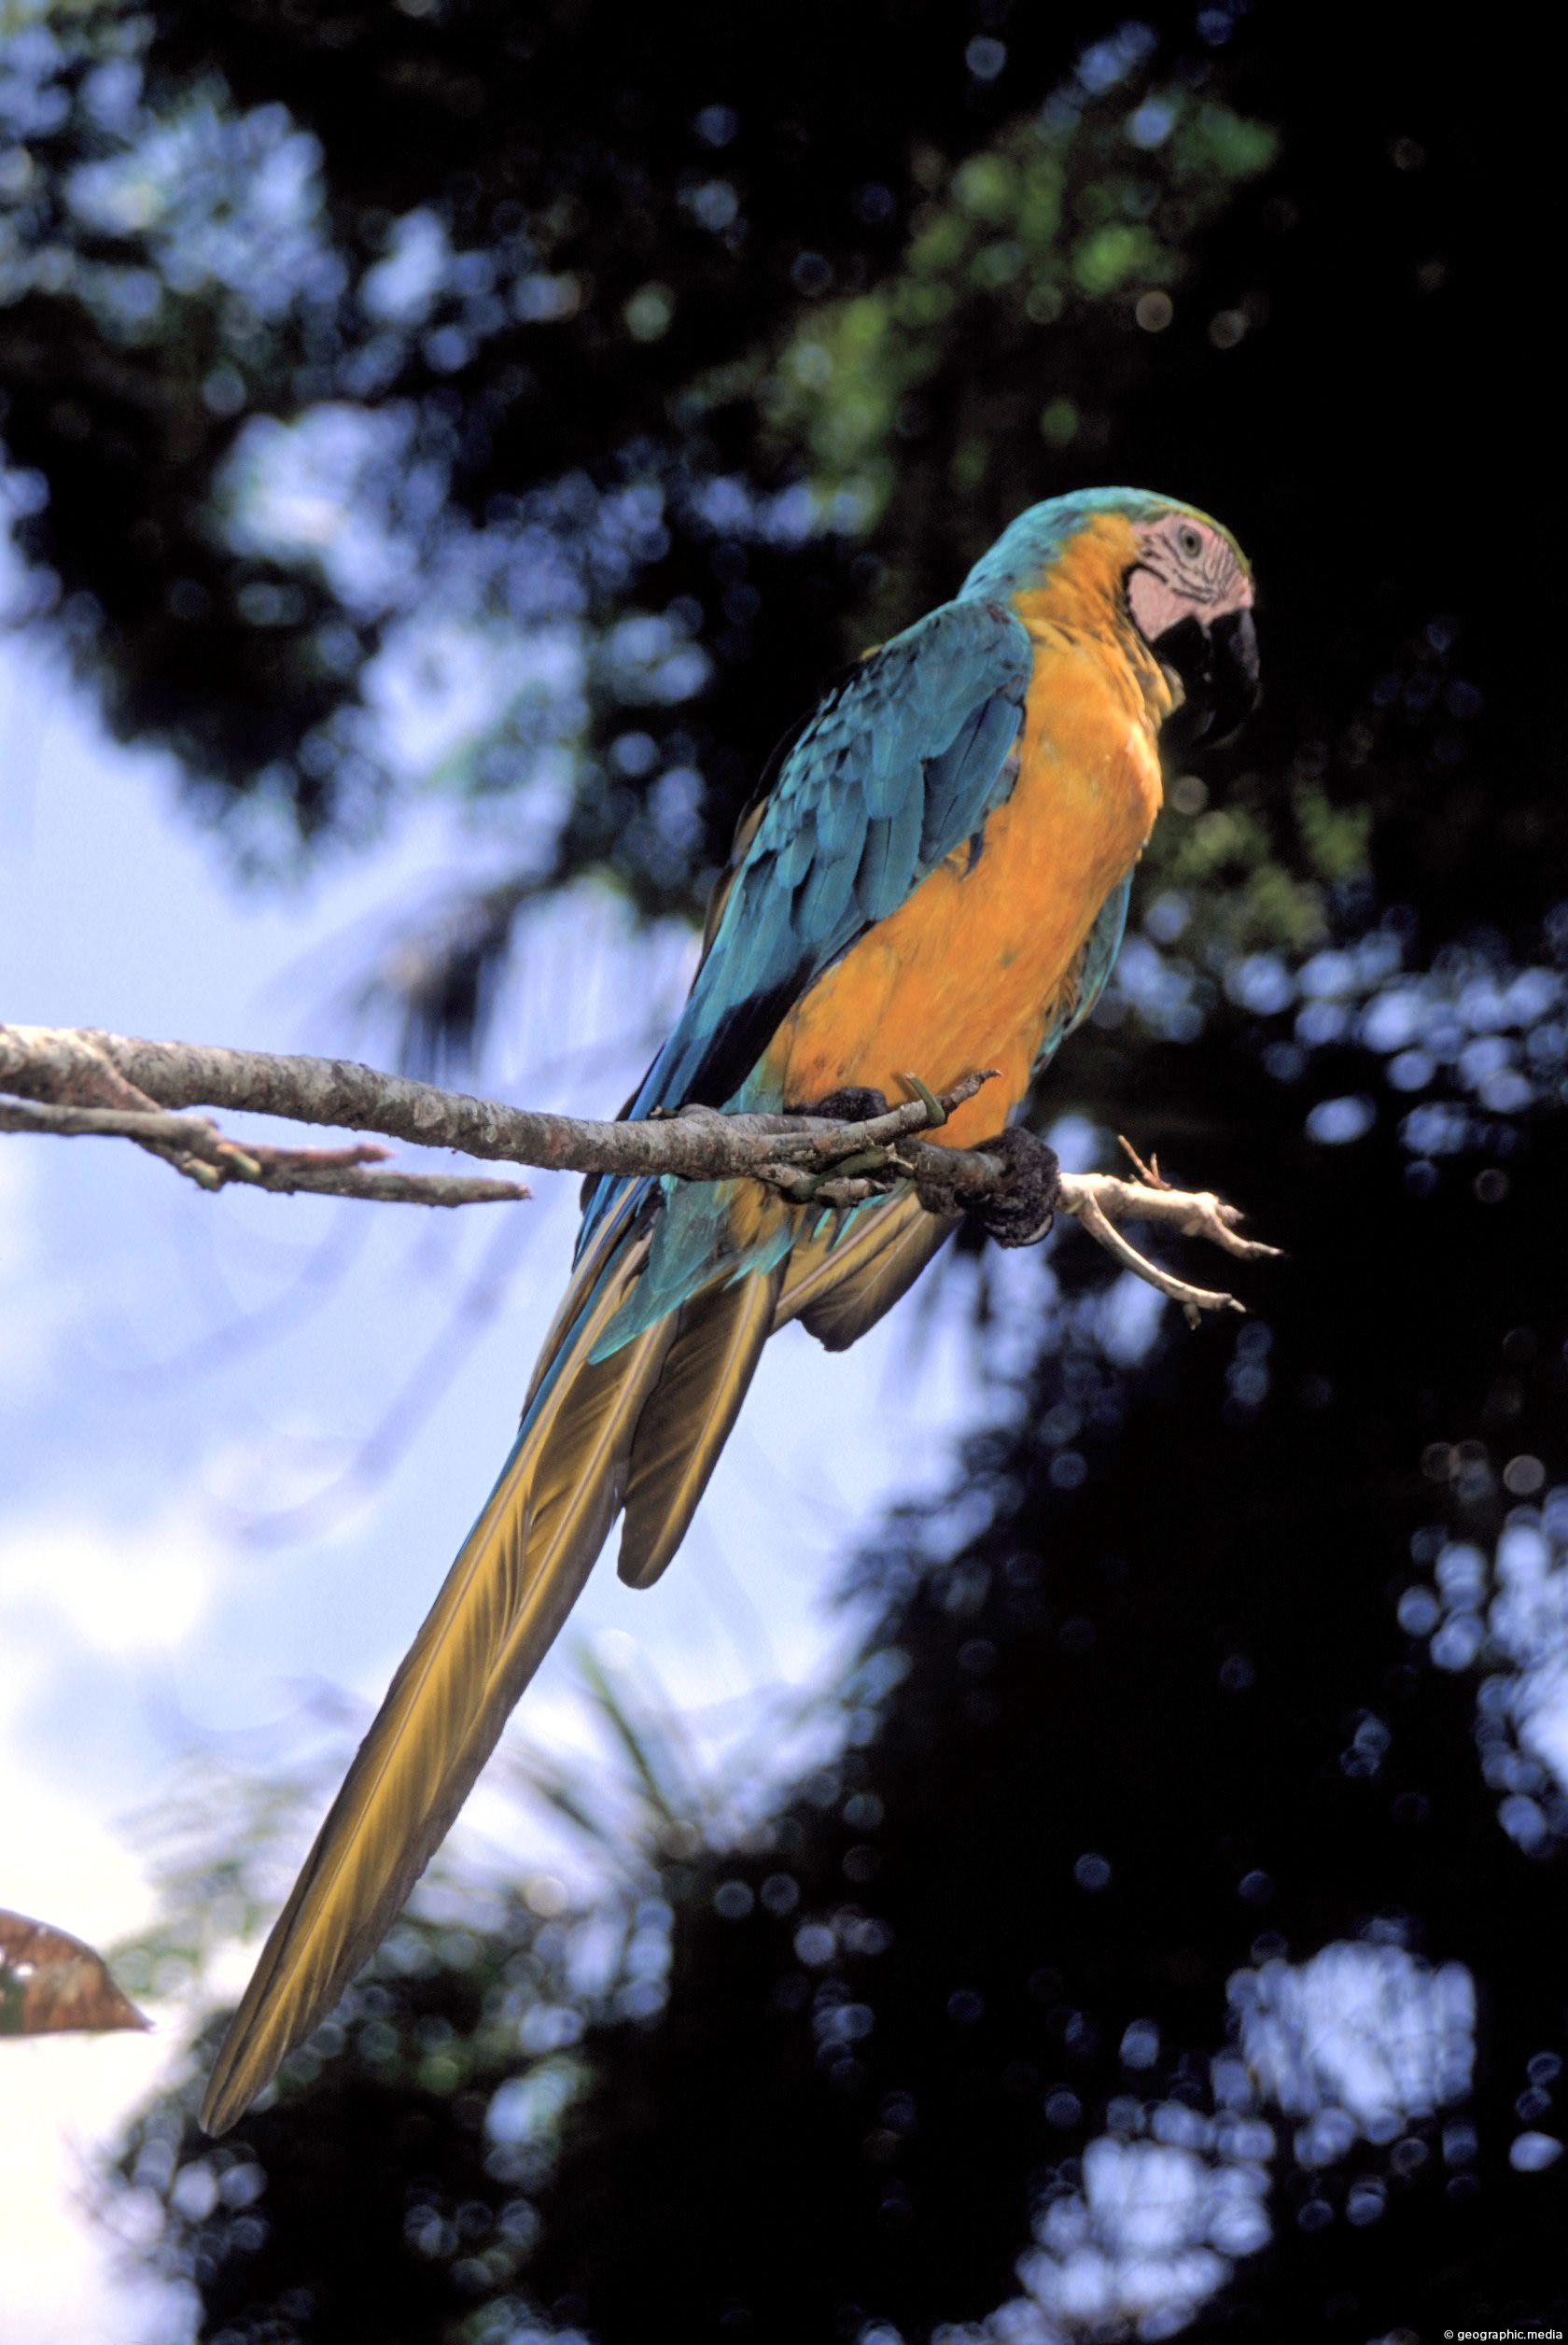 Blue and Yellow Macaw in the Amazon